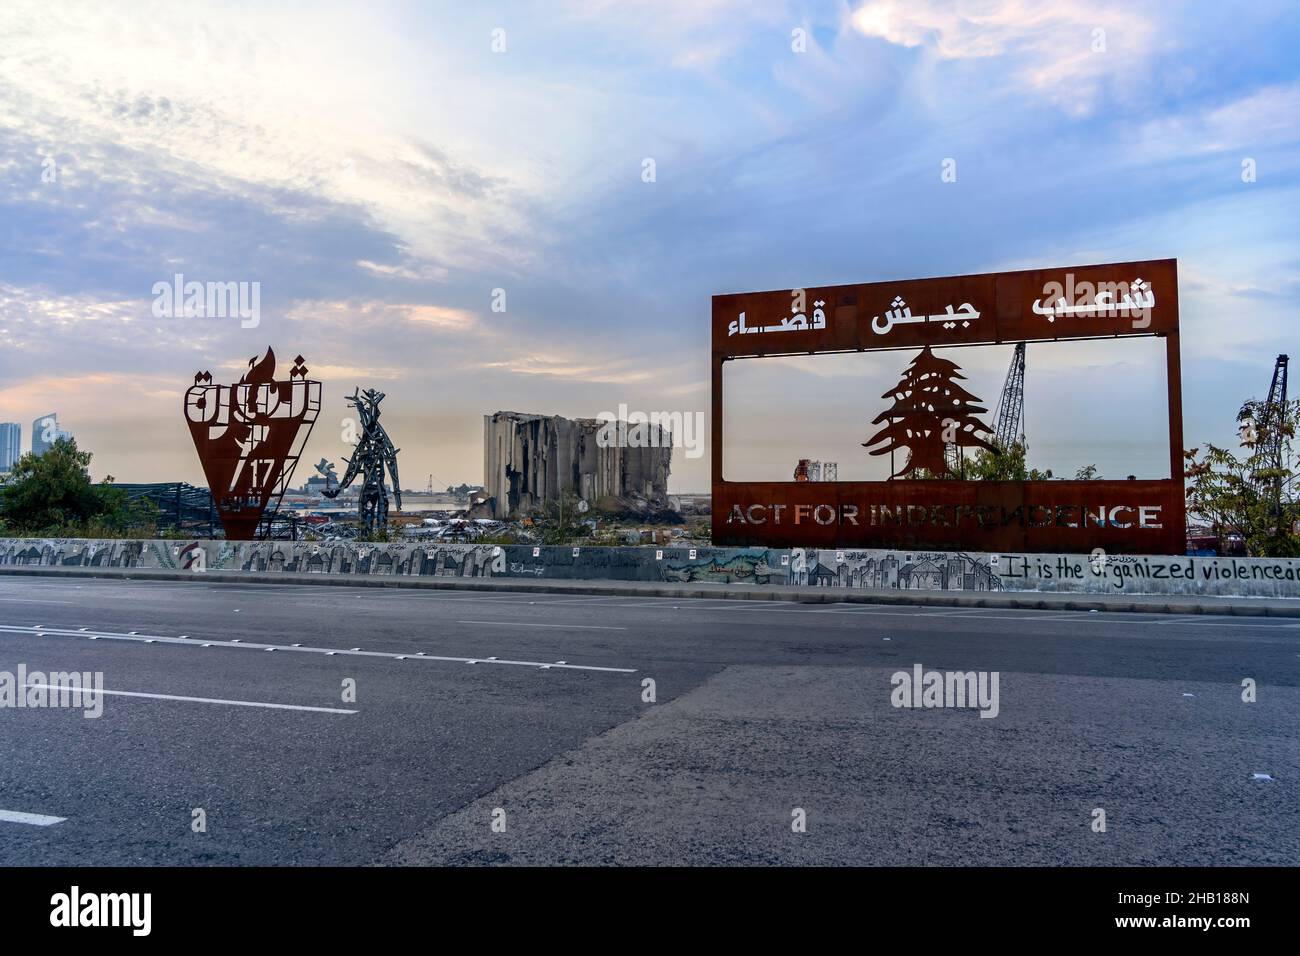 Beirut Lebanon - Dec 12 2021: Beirut Port Explosion site with recent memorials. Translation: People, Army, Judiciary Stock Photo